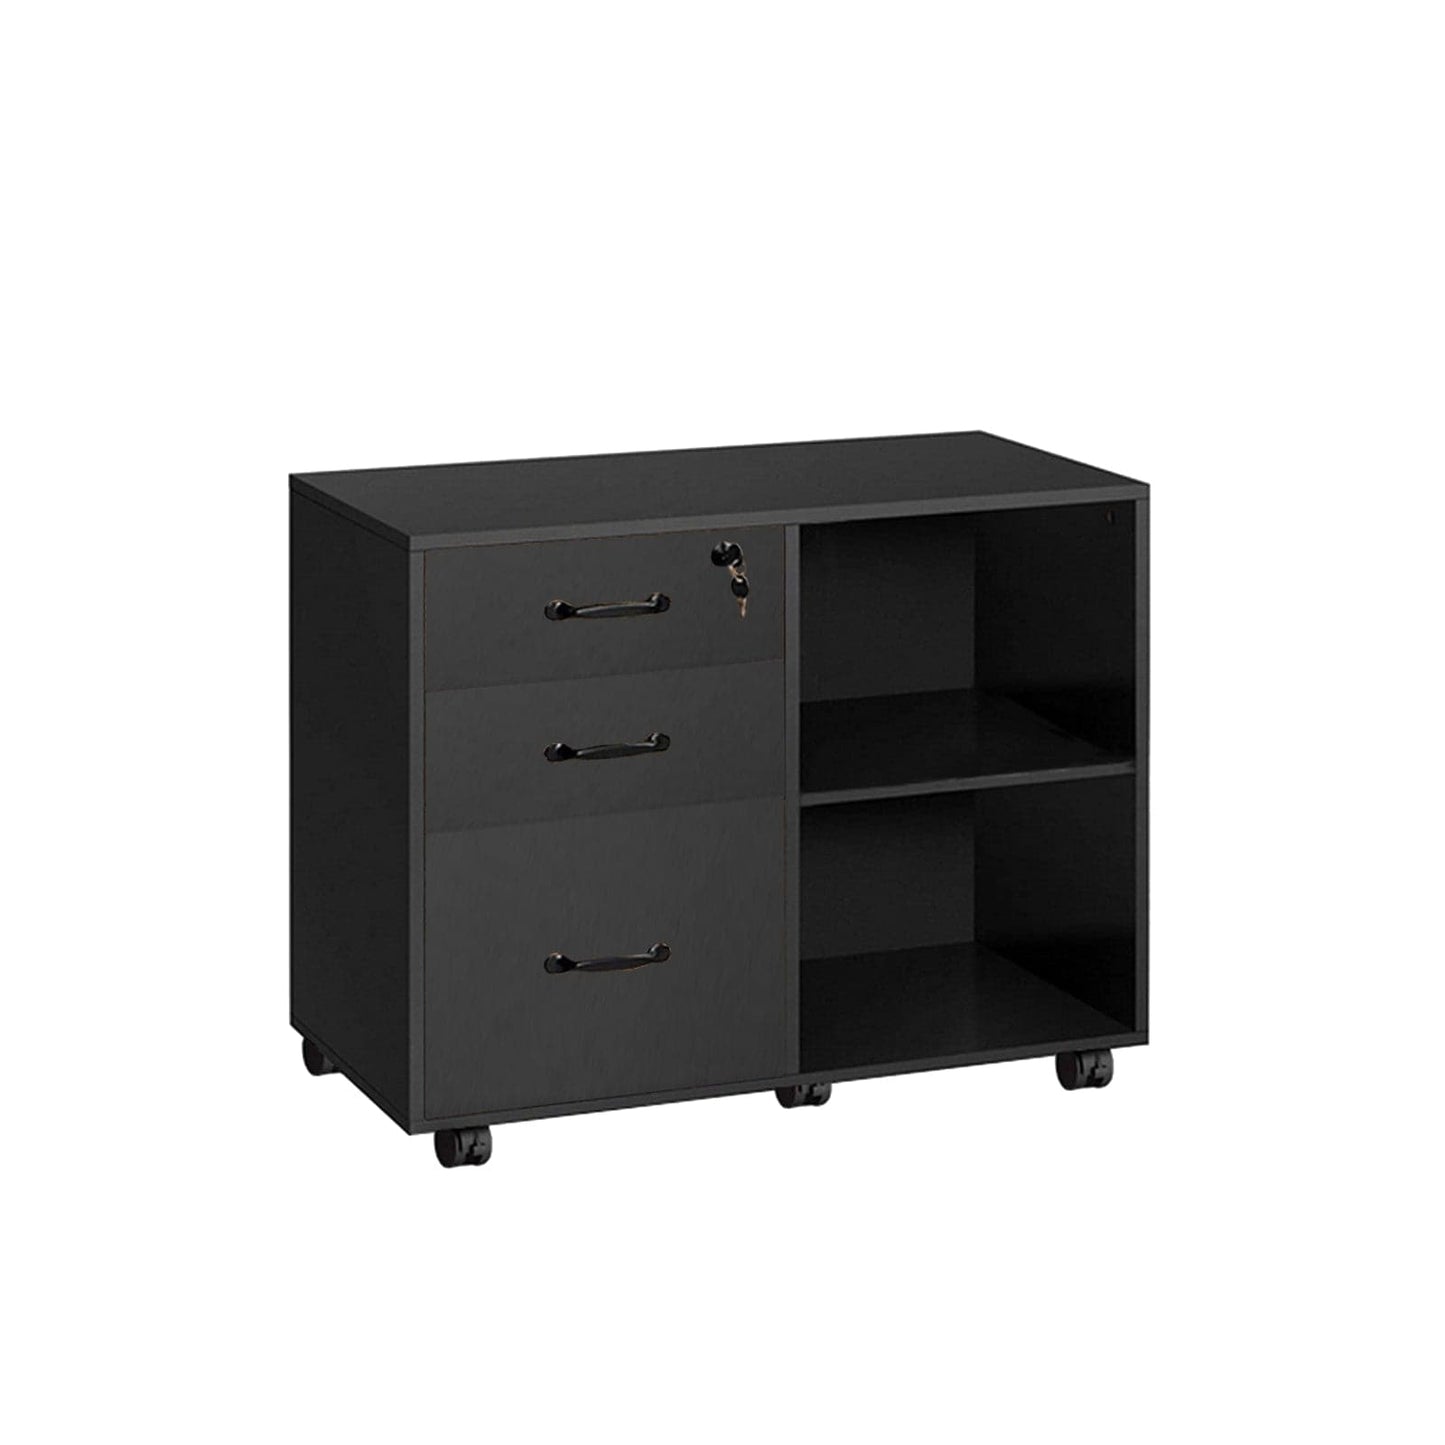 3 Drawer Office File Cabinets in black